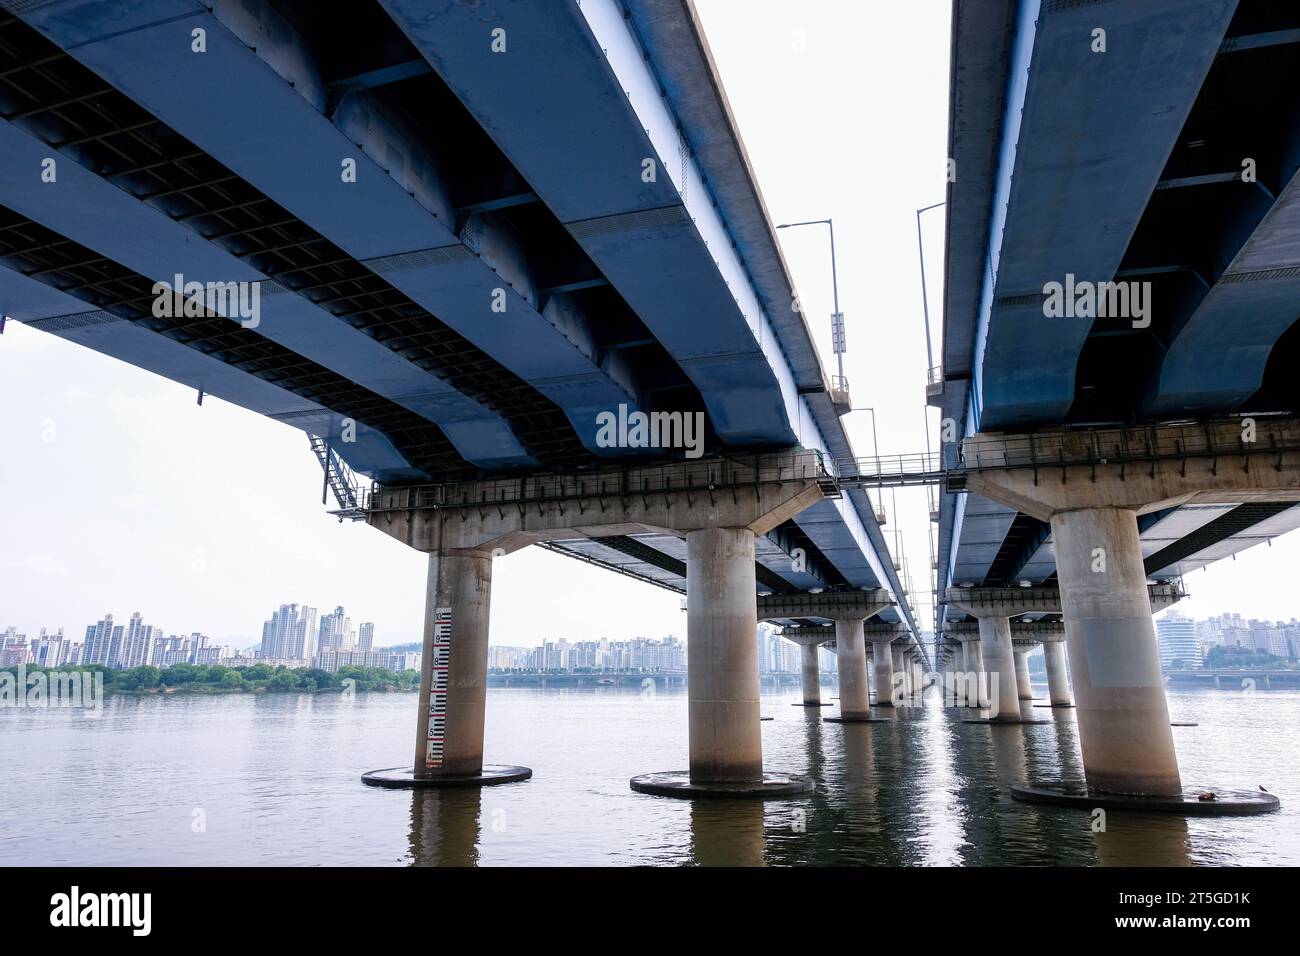 Seoul, South Korea - 11 July 2022: View of river at Yeouido Hangang Park, one of the parks next to Han river Stock Photo